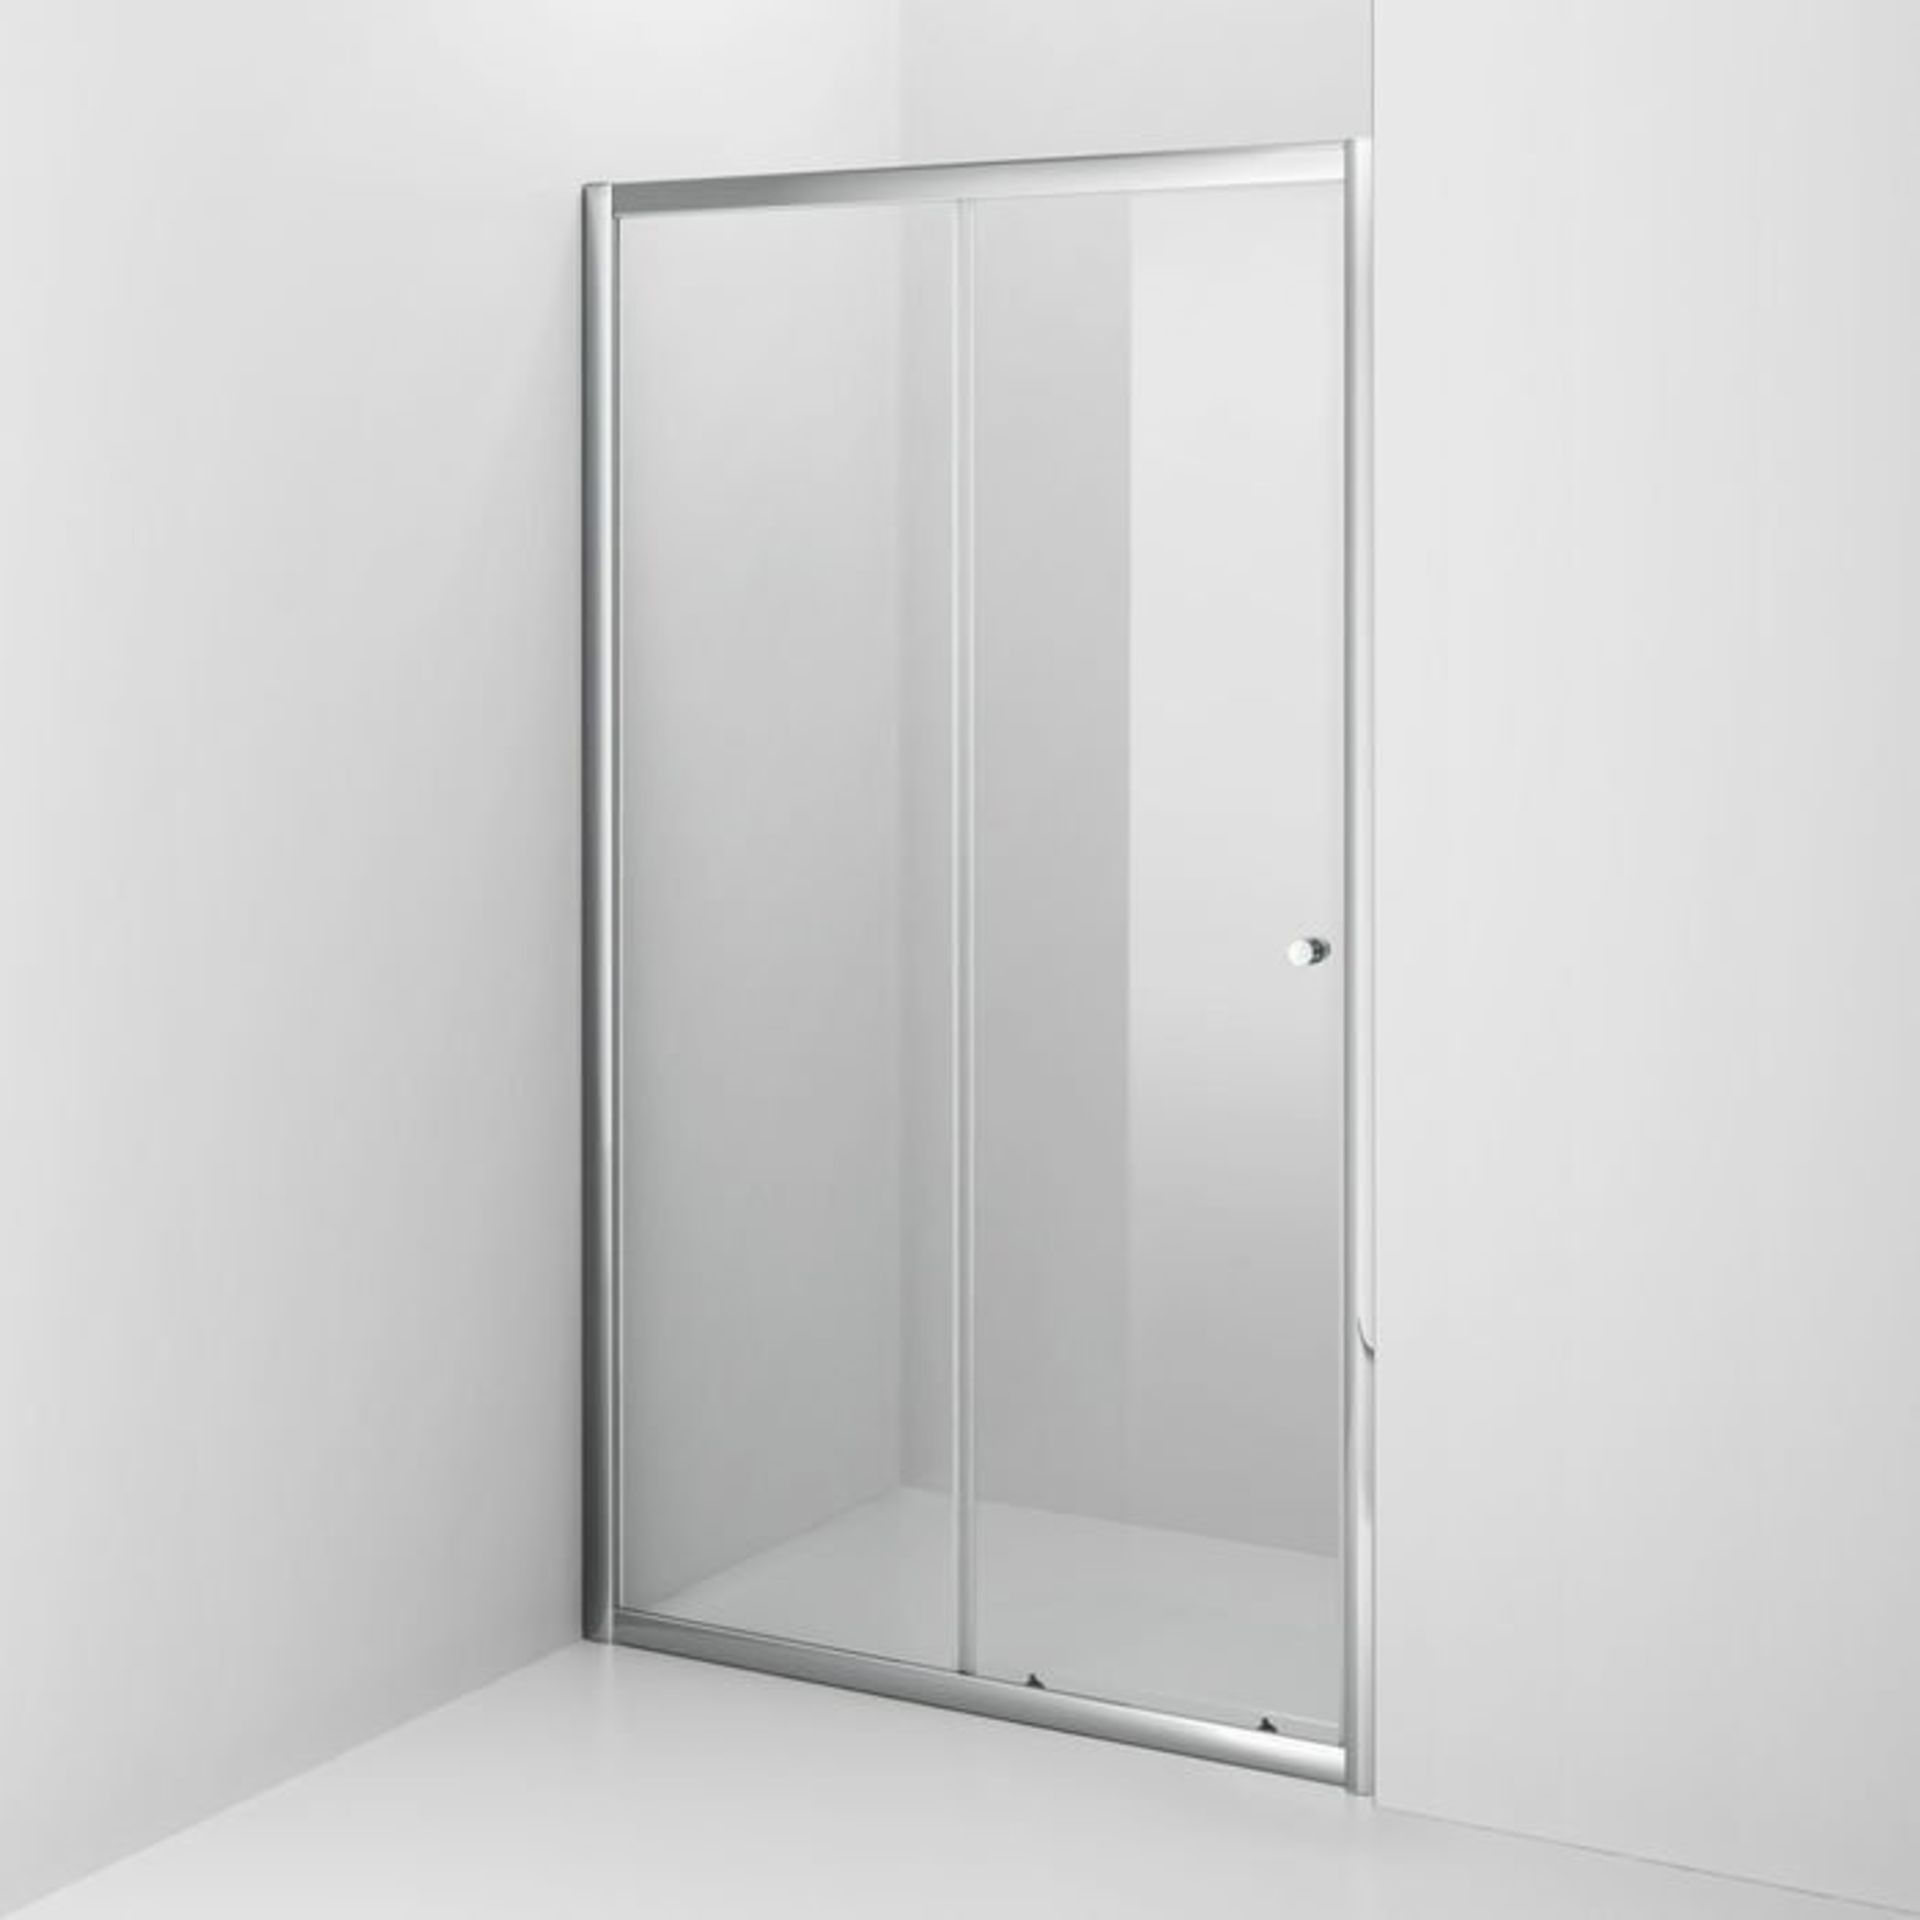 (M29) 1200mm - Elements Sliding Shower Door. RRP £299.99. 4mm Safety Glass Fully waterproof tested - Image 5 of 6